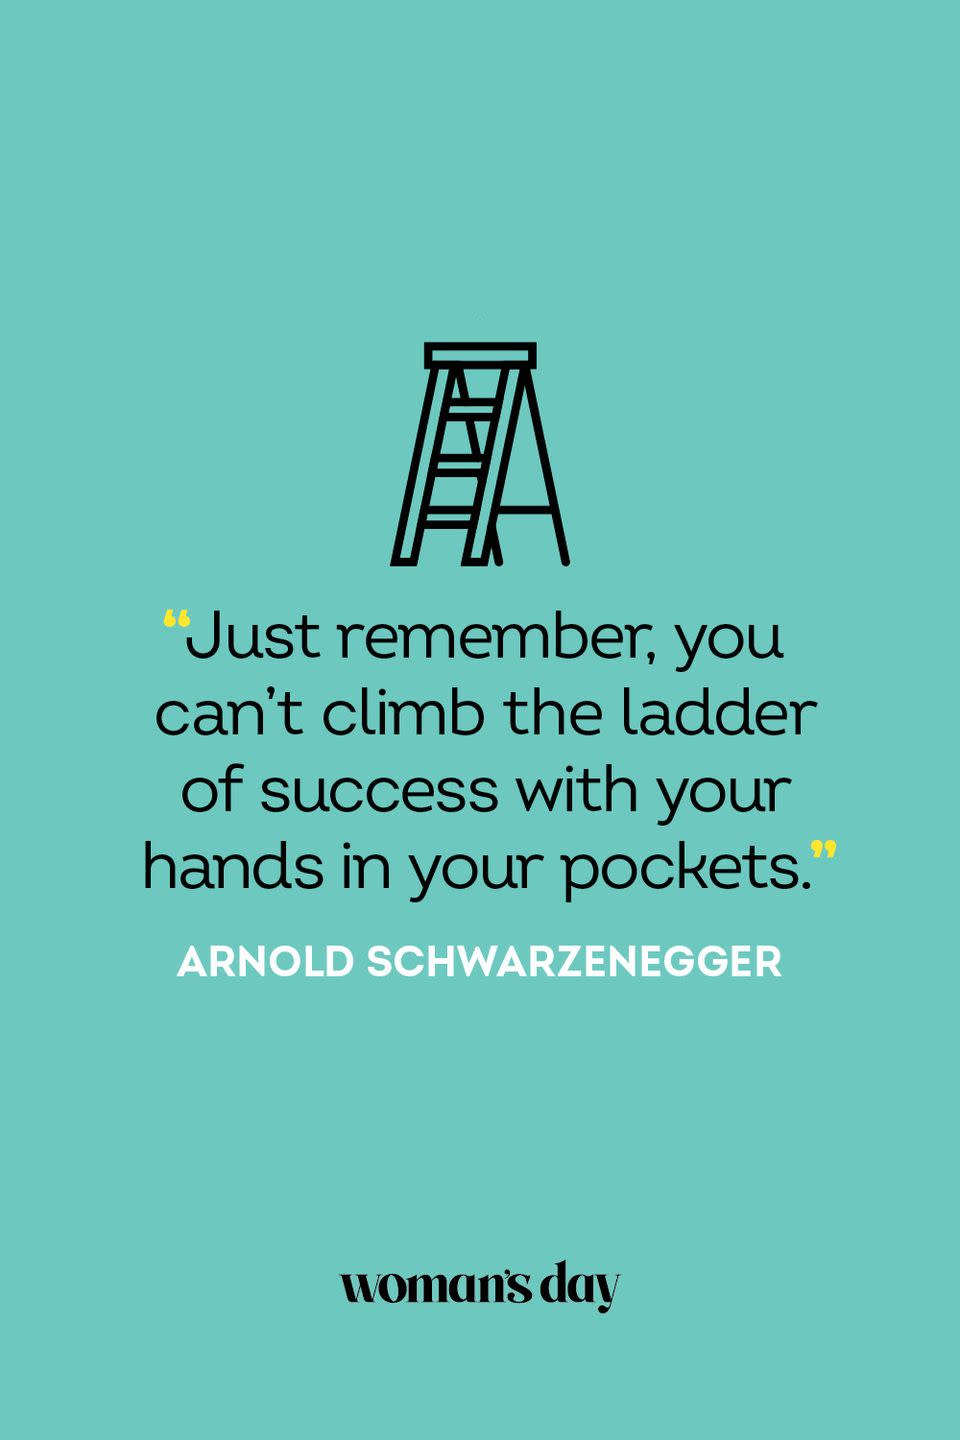 <p>“Just remember, you can’t climb the ladder of success with your hands in your pockets.”</p>